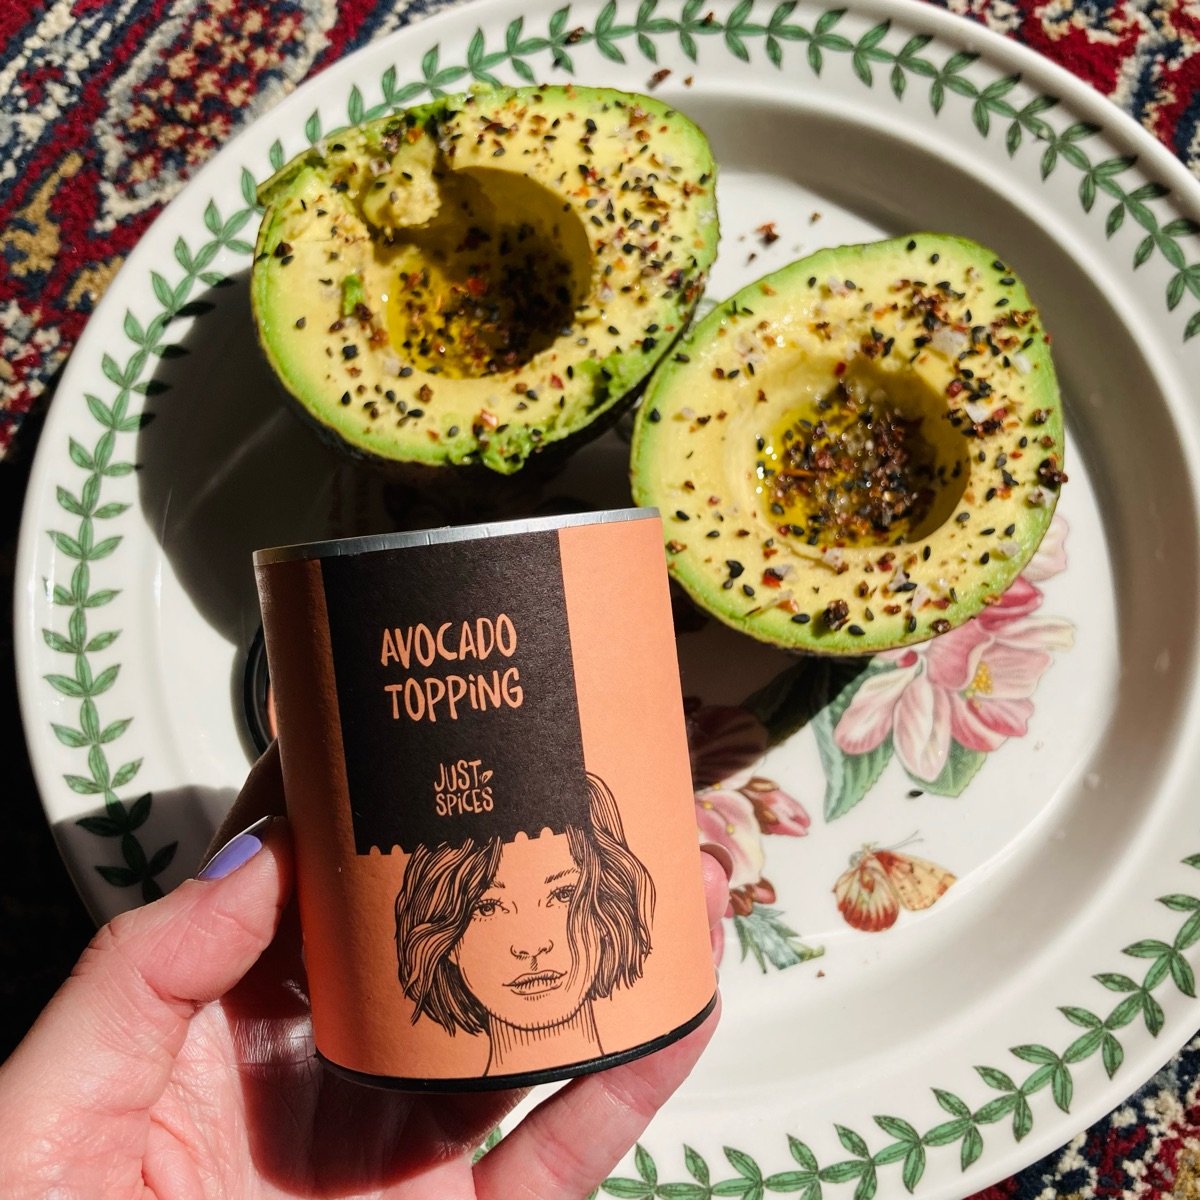 Just Spices Avocado Topping Reviews